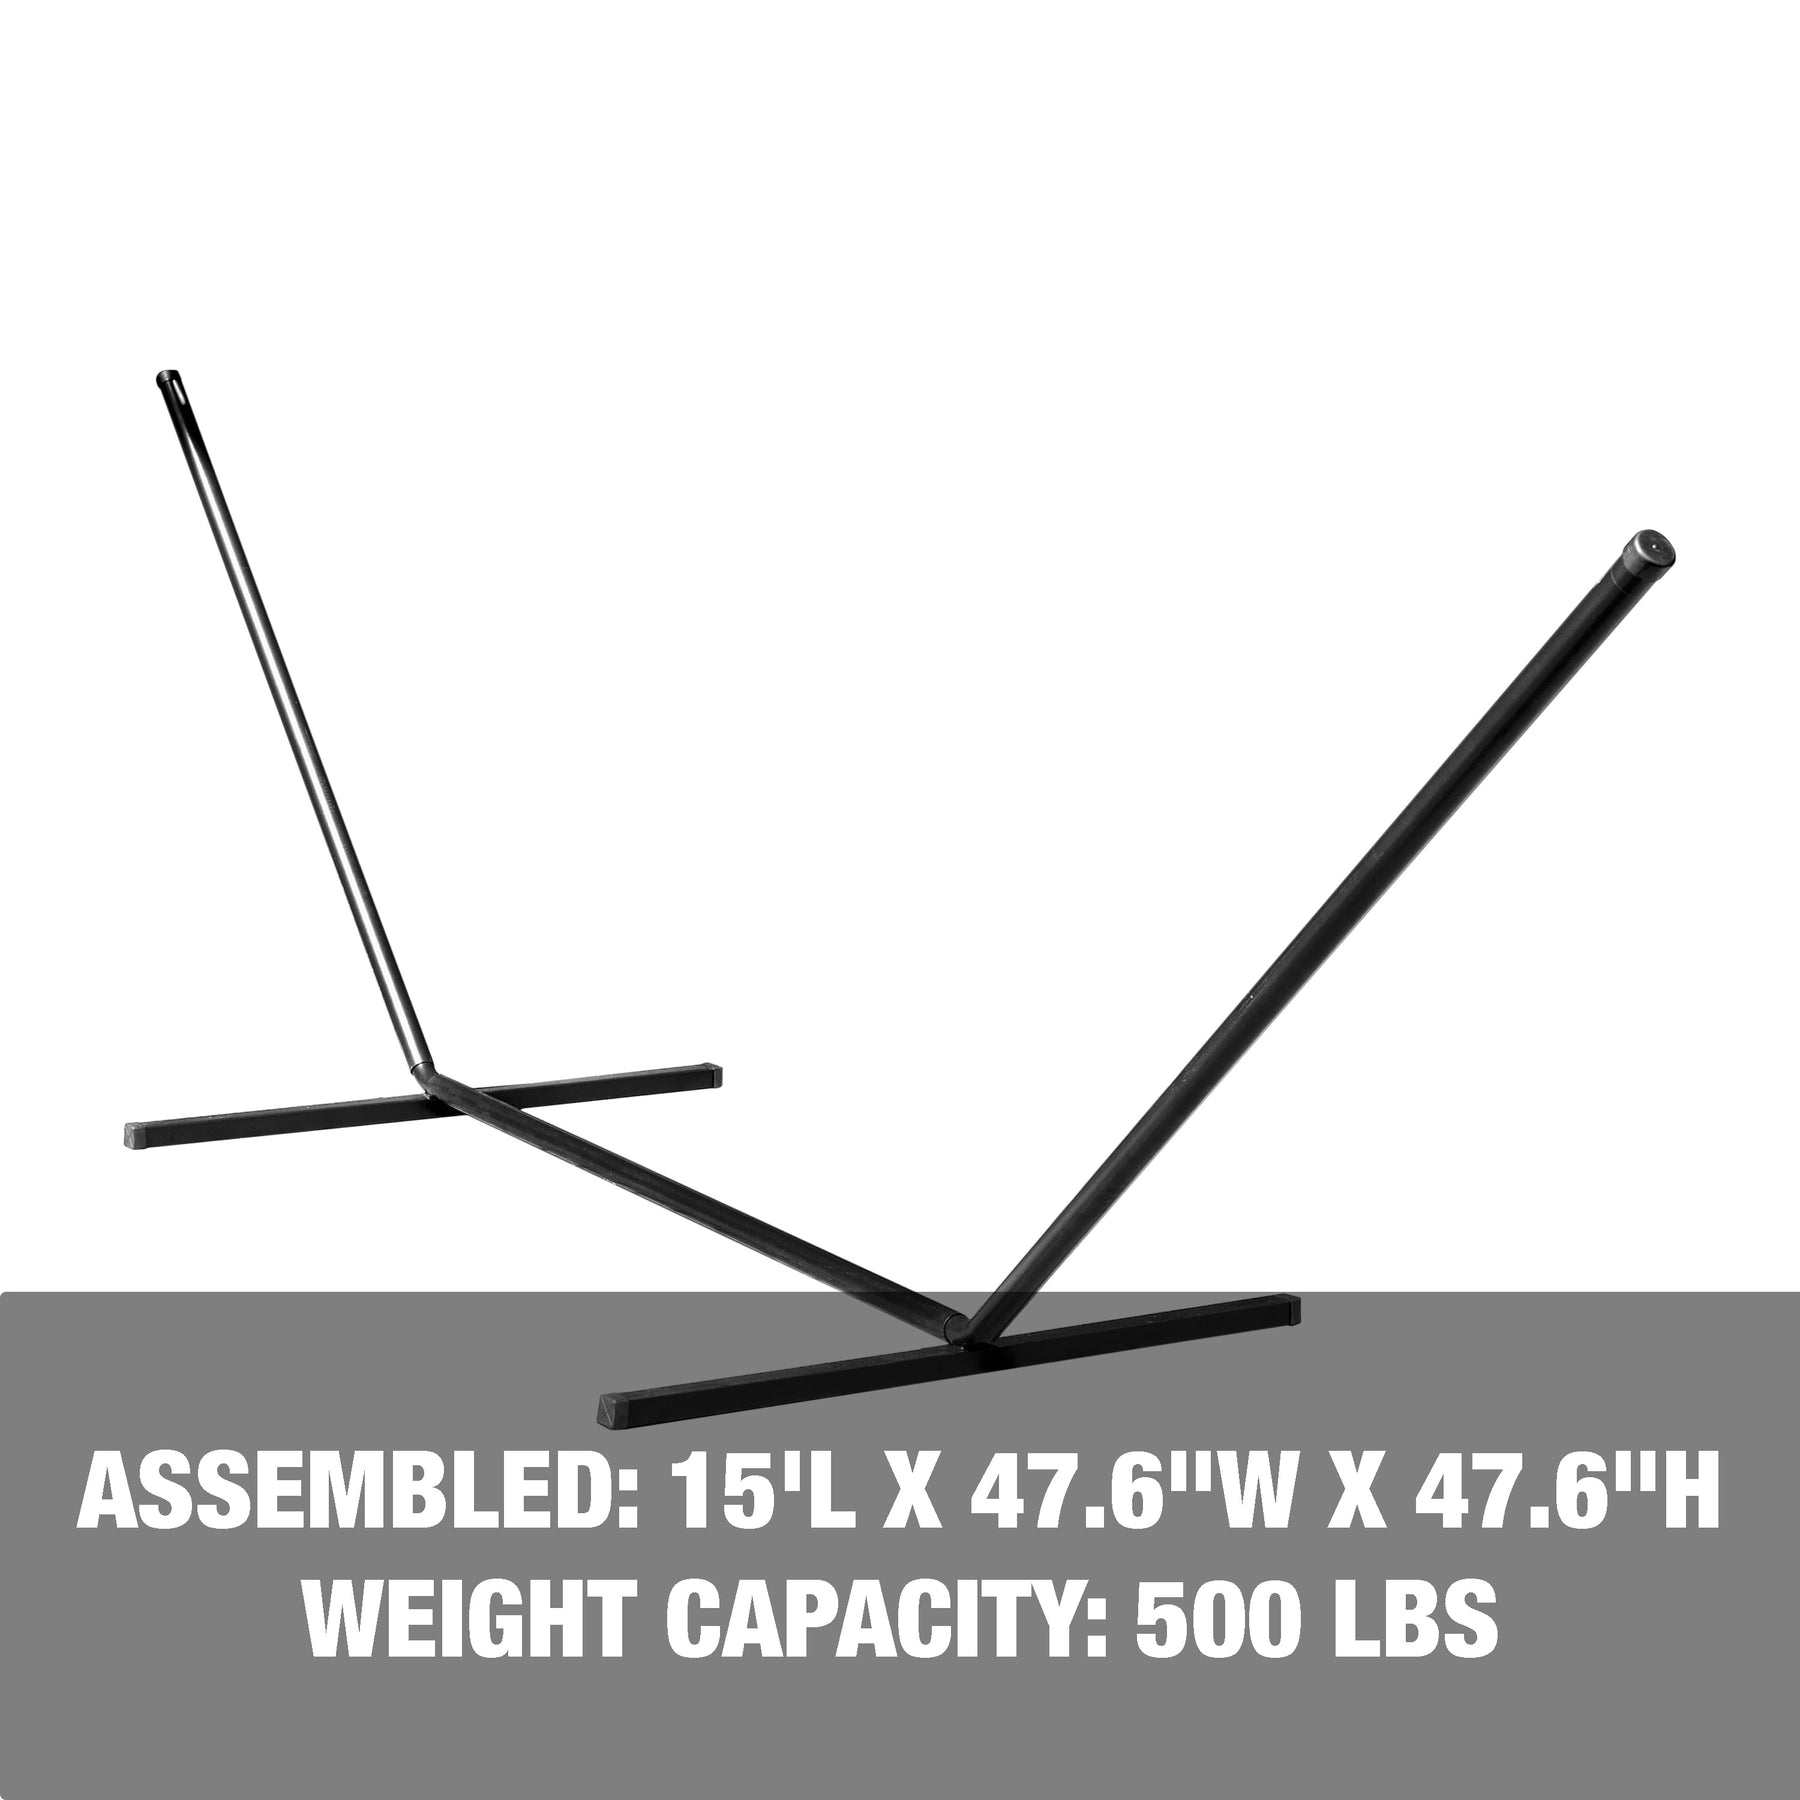 Assembled dimensions: 15 feet long, 47.6 inches wide, and 47.6 inch height, with a weight capacity of 500 pounds.